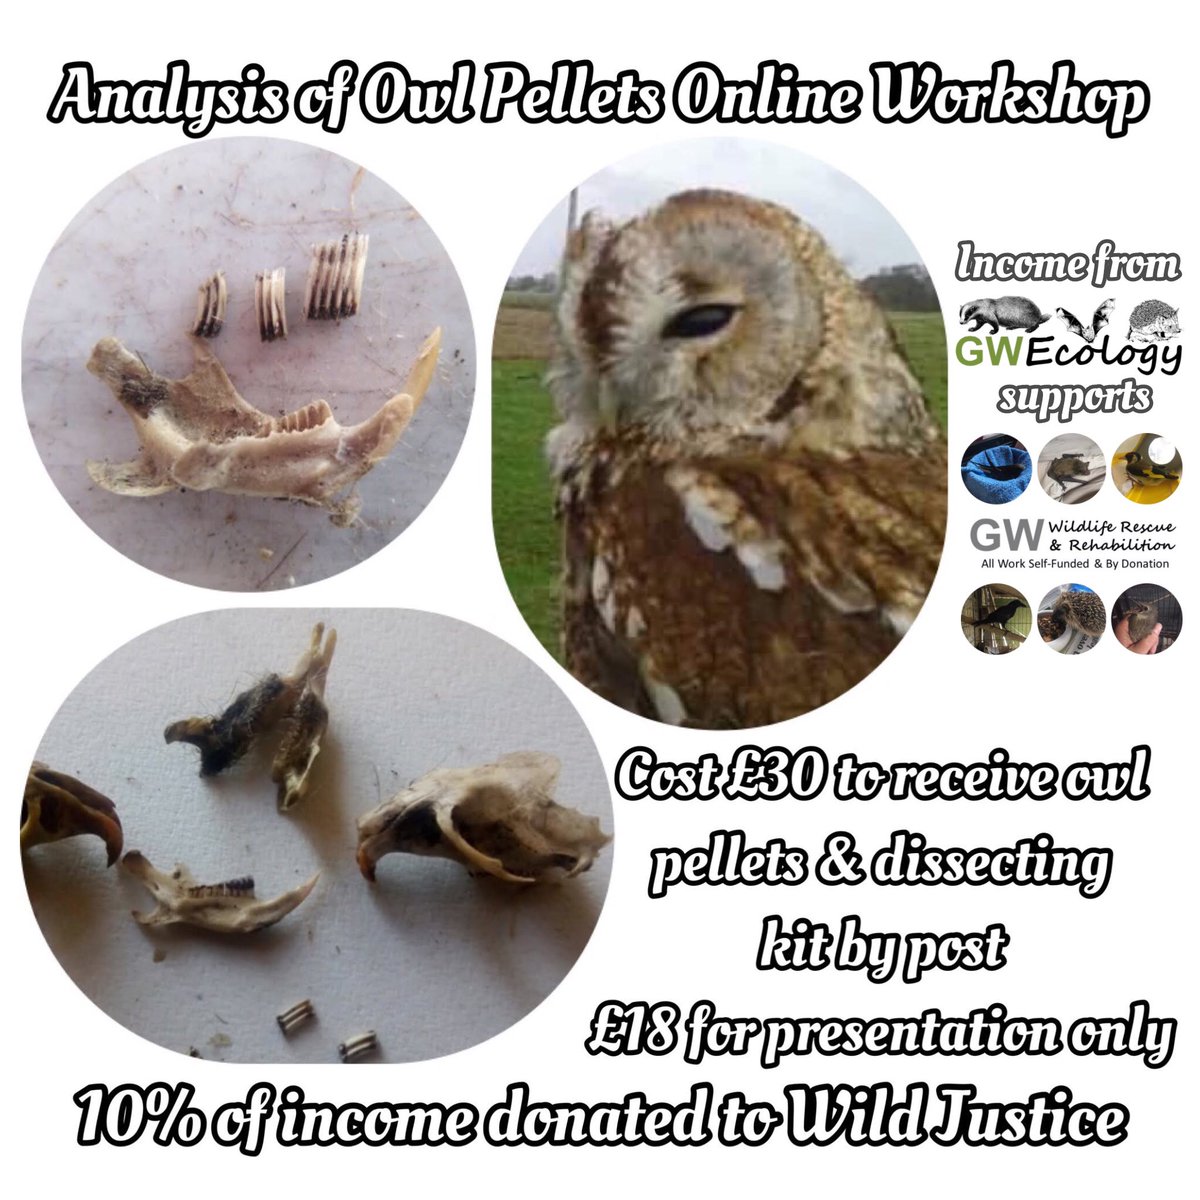 Analysis of Owl Pellets Online Workshop date changed from 28 Mar to Mon 8 Apr. Cost £18 or £30. £30 includes posting of pellets & dissecting kit & closes 10am 4 Apr. 10% of income goes to @WildJustice_org & rest to support GW Wildlife Rescue & Rehab. eventbrite.co.uk/e/owl-pellet-a…